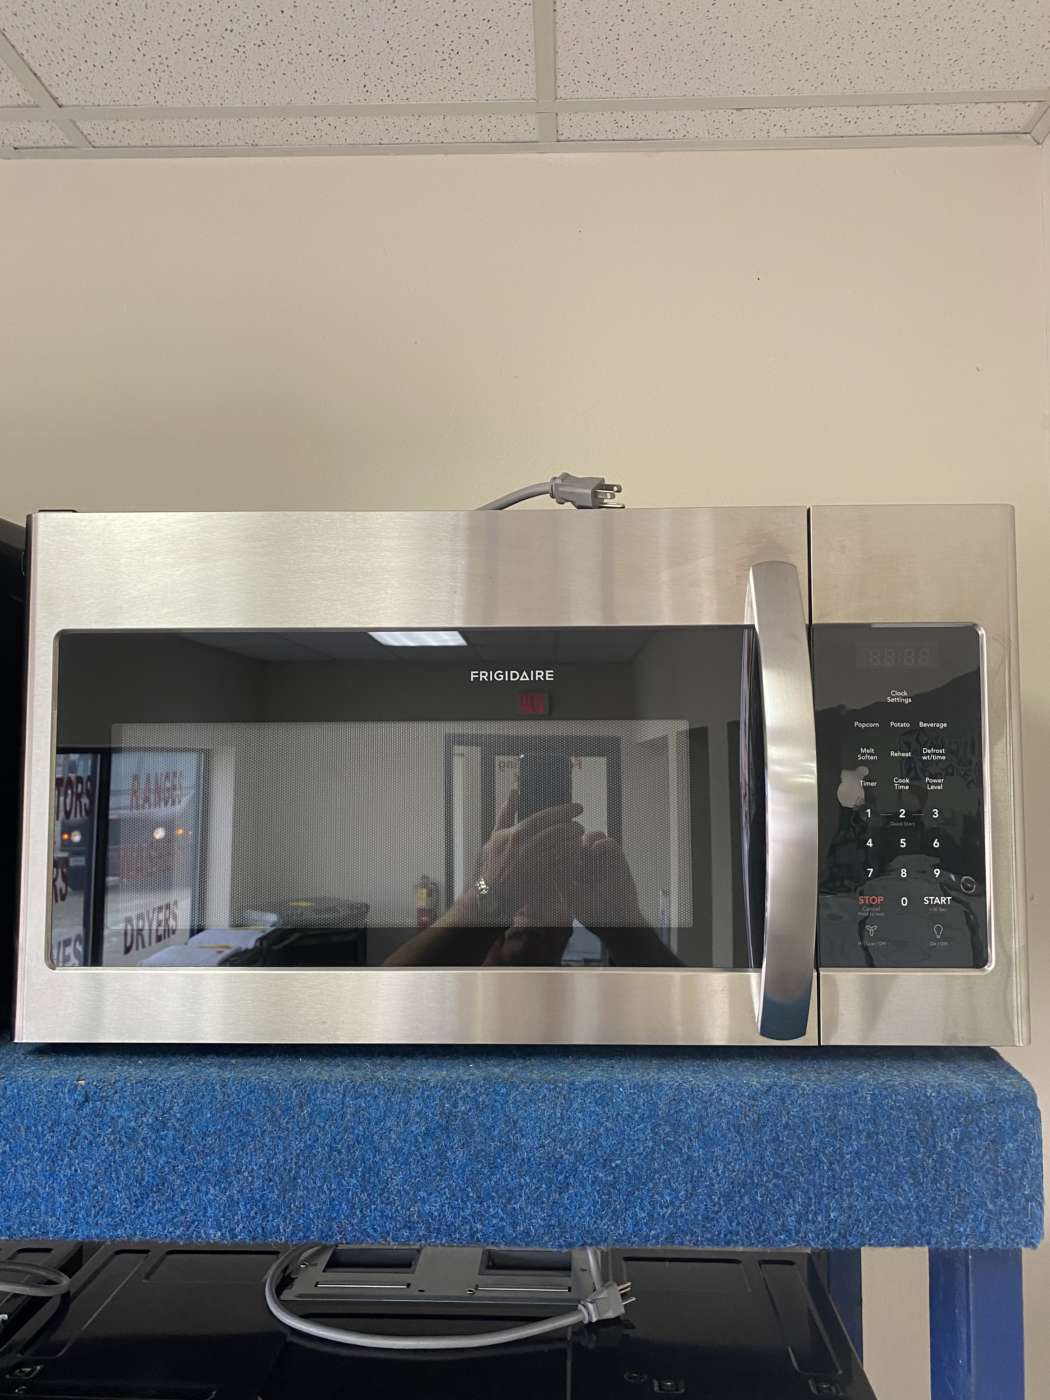 Reconditioned FRIGIDAIRE 1.6 Cu. Ft. 1000 Watt OTR Microwave – Stainless